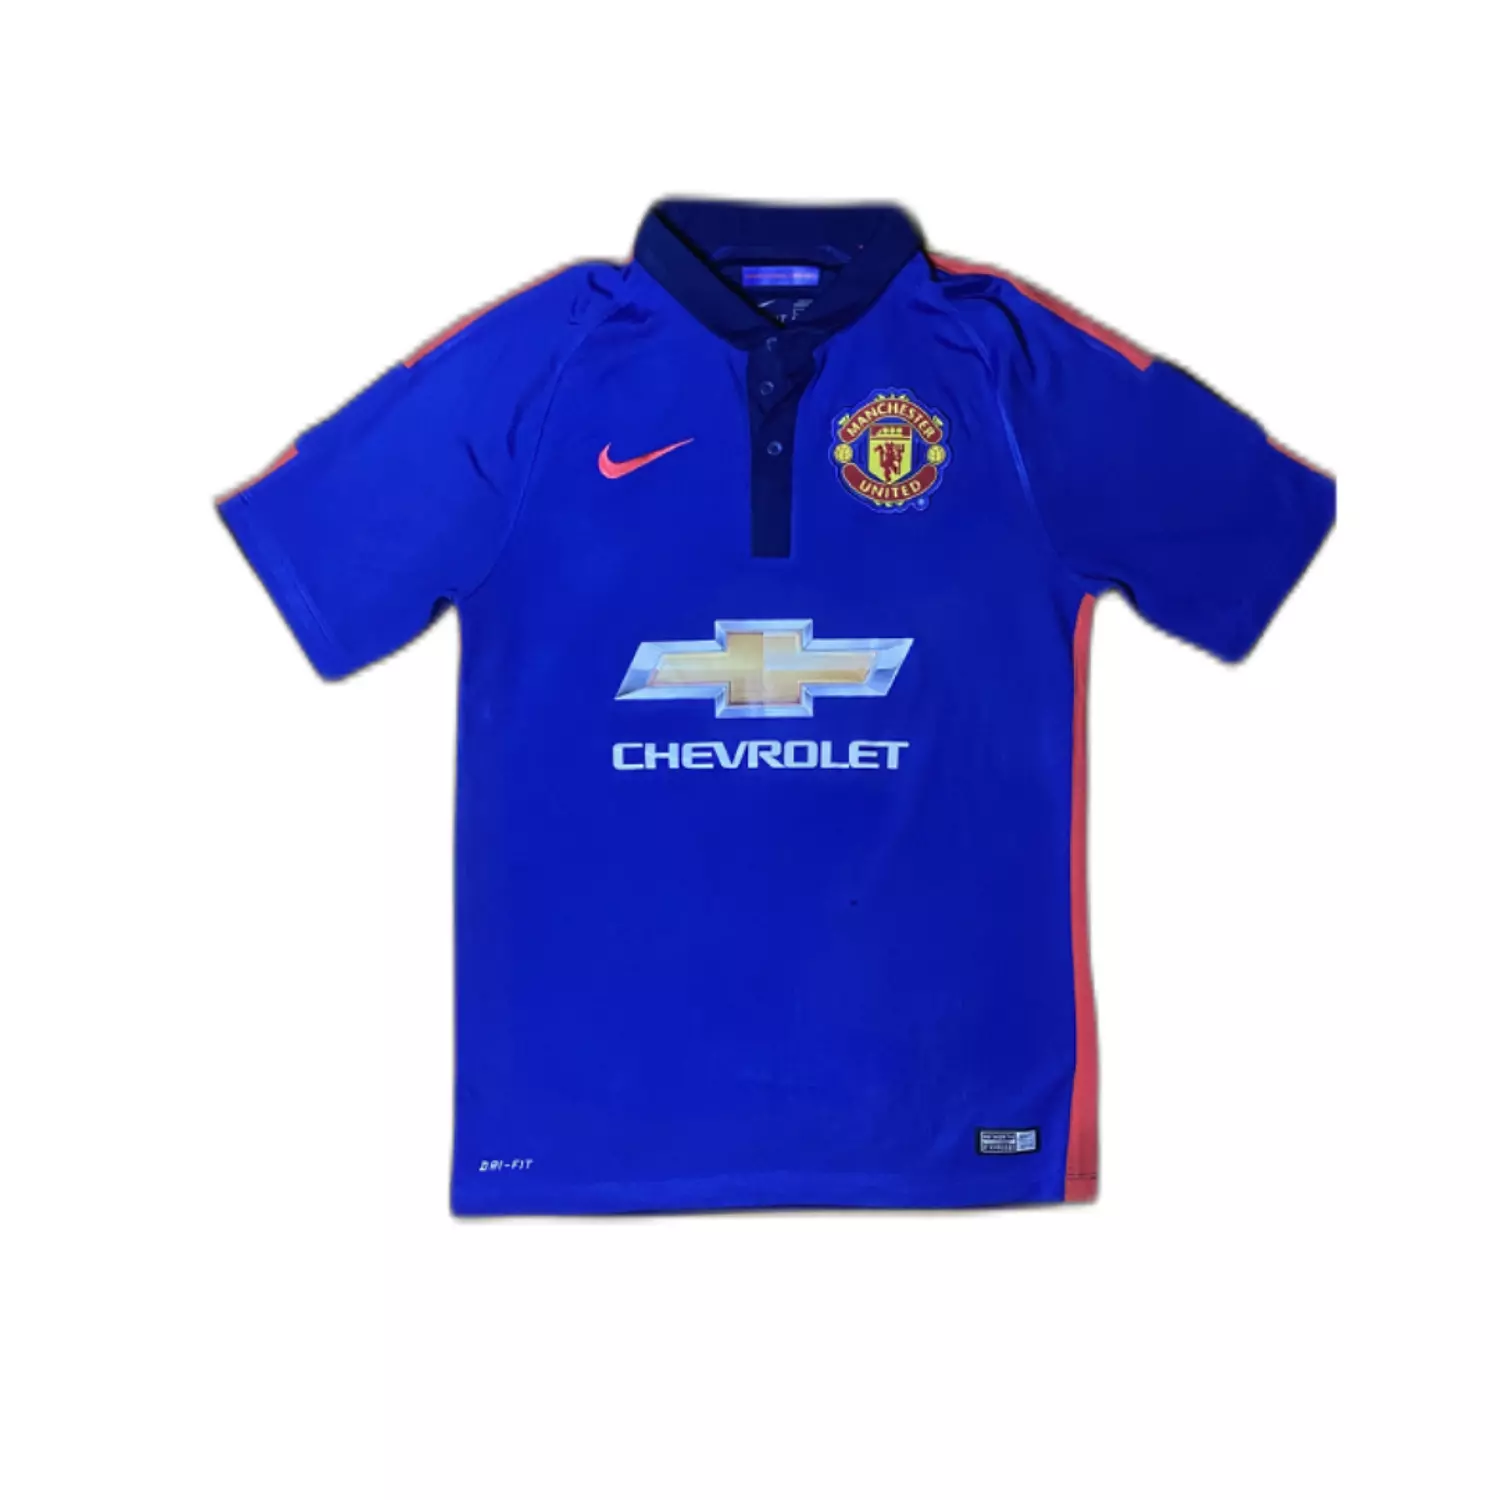 Manchester United 2013/14 Away Kit (S) Di Maria #7 hover image